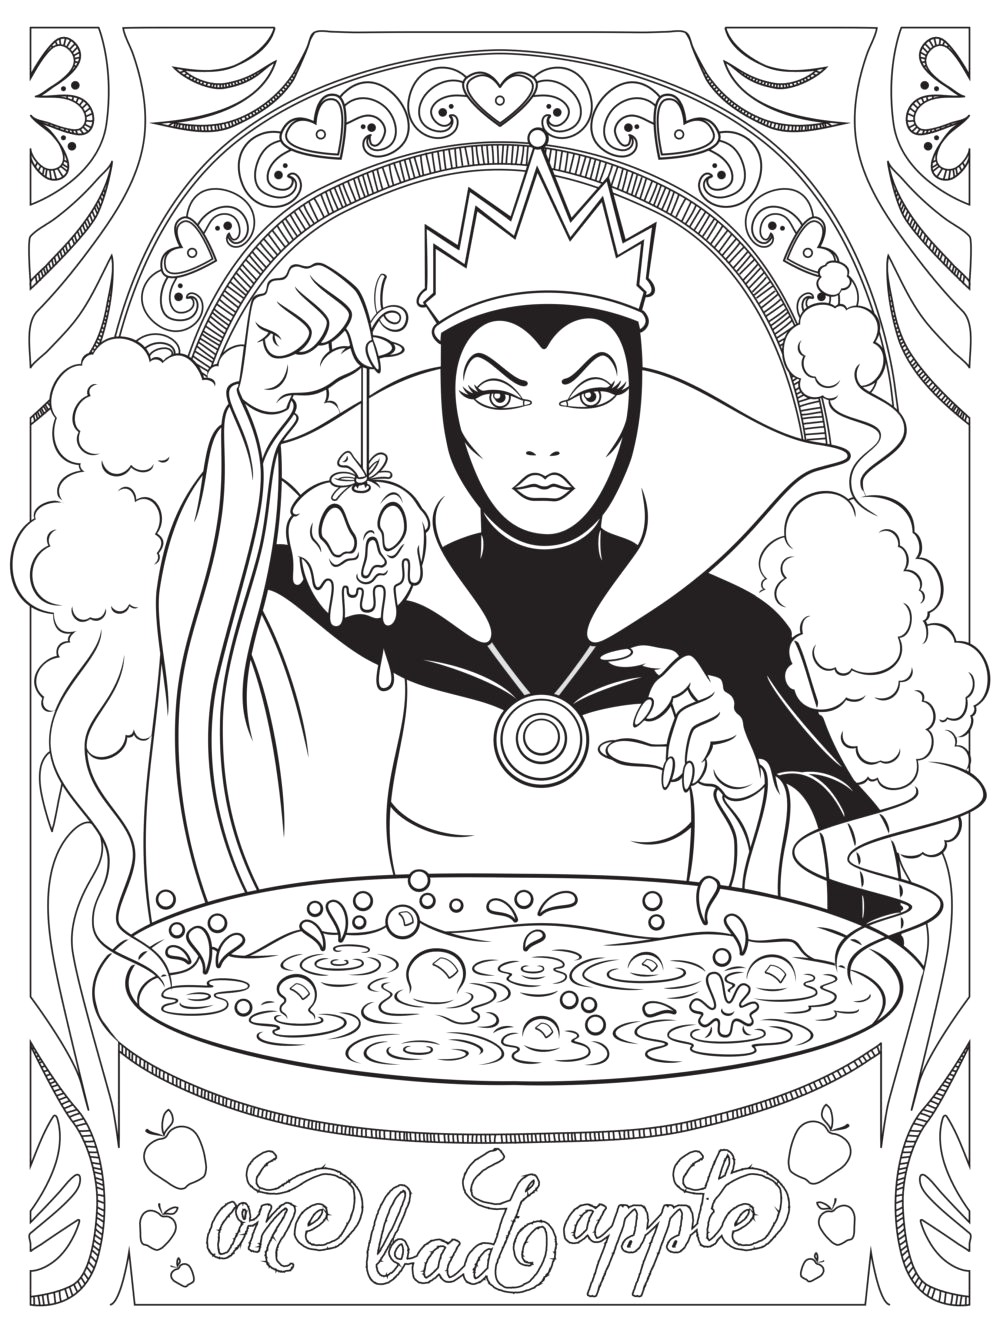 Disney Coloring Pages For Adults   Best Coloring Pages For Kids ...